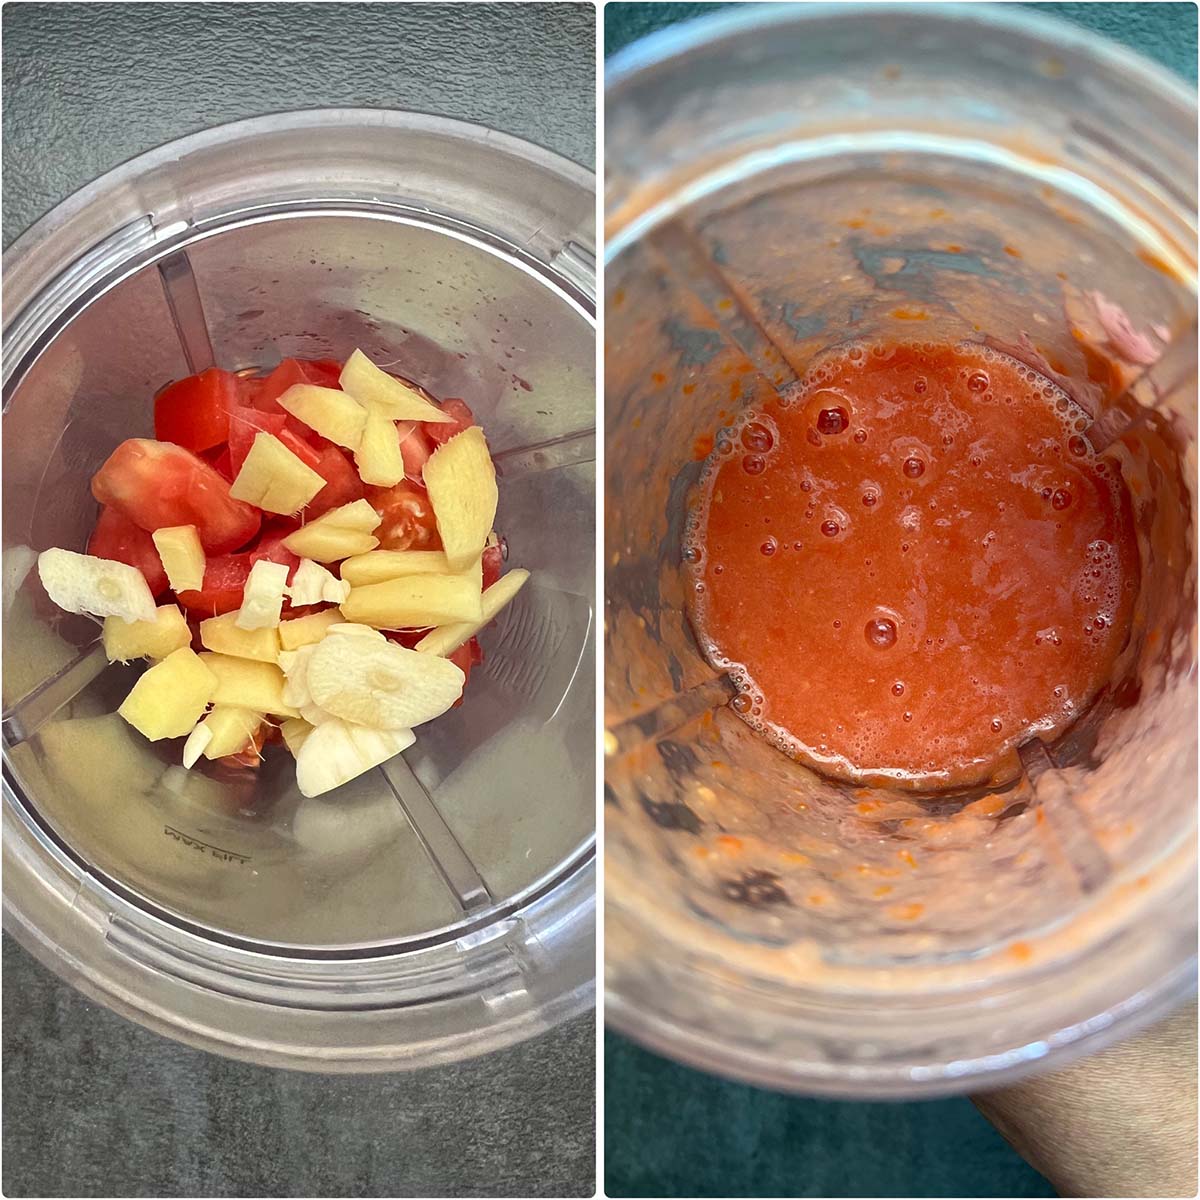 2 panel photo showing the blending of tomatoes, ginger and garlic.